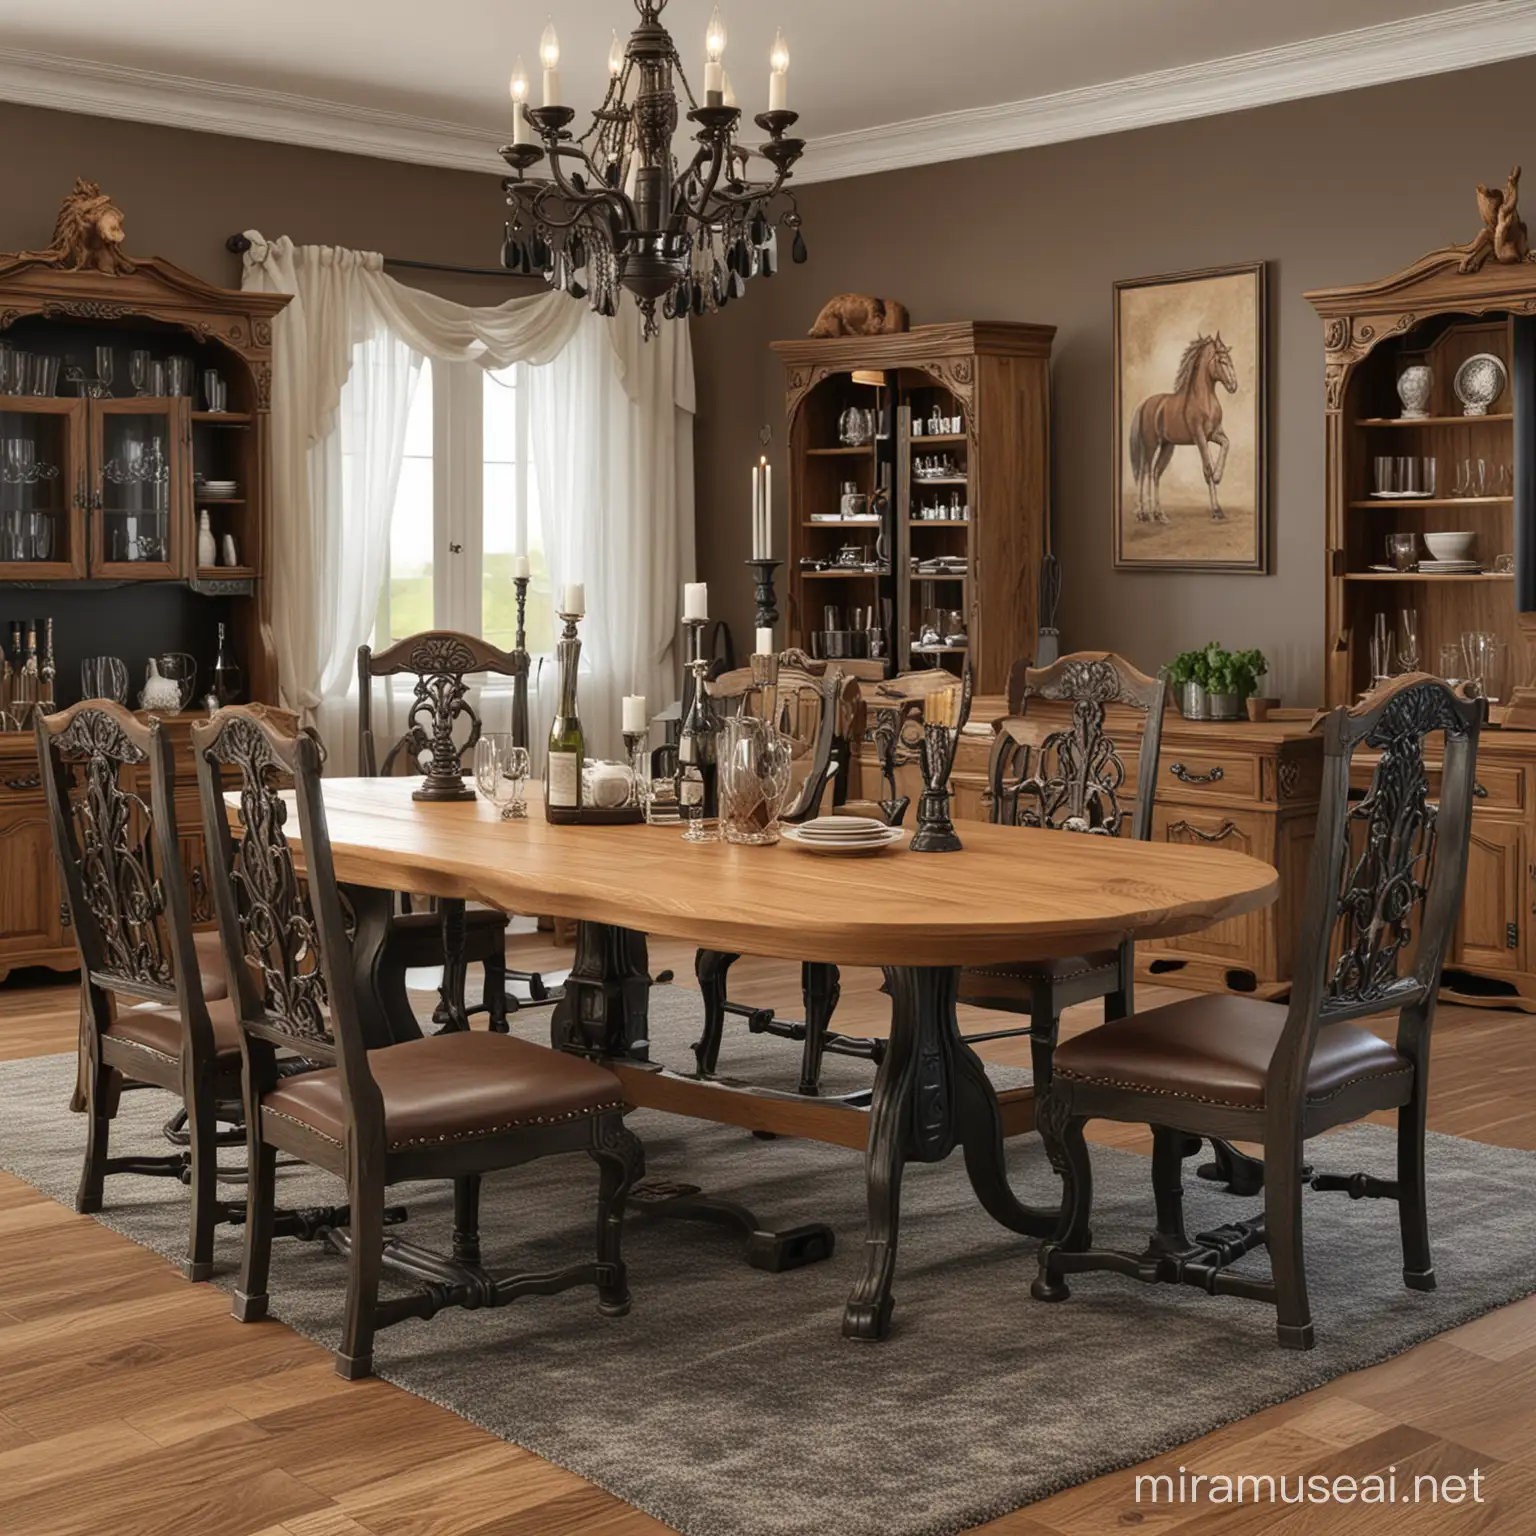 Elegant HorseThemed Dining Room with Oak Furniture and Realistic Horse Sculpture